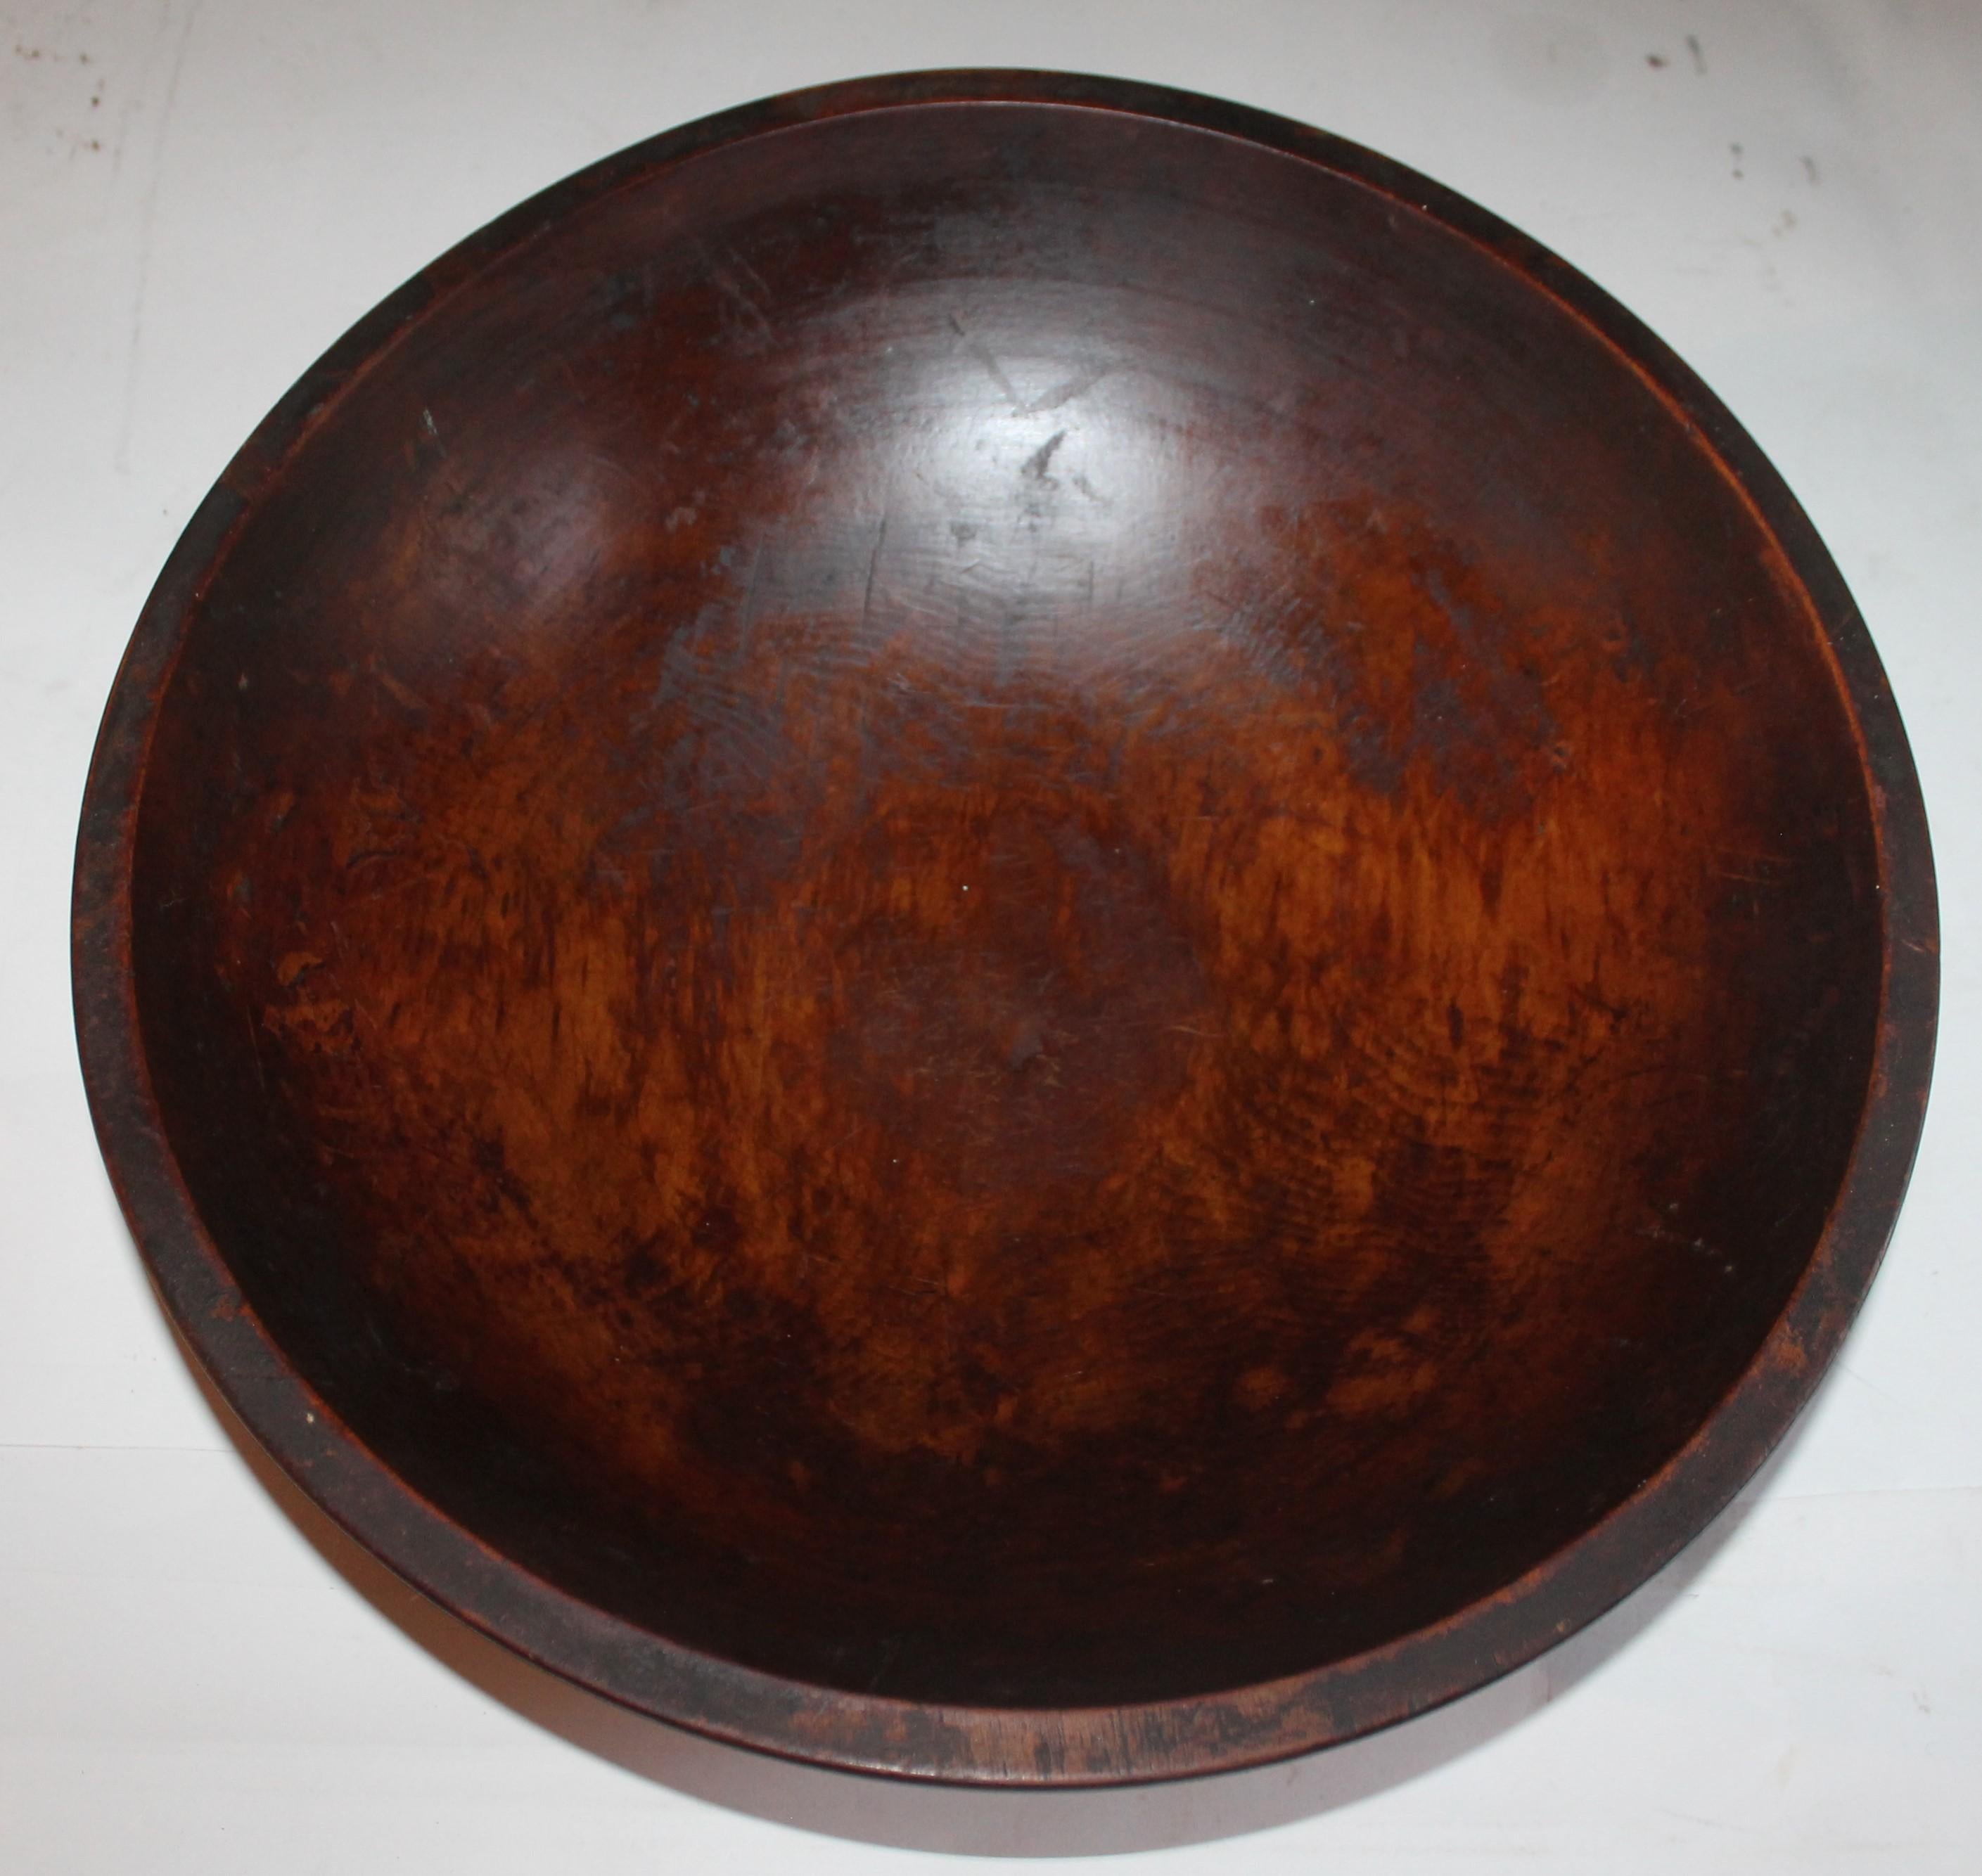 This fine patinated butter bowl is in fine condition and has a wonderful undisturbed surface. It is a 15